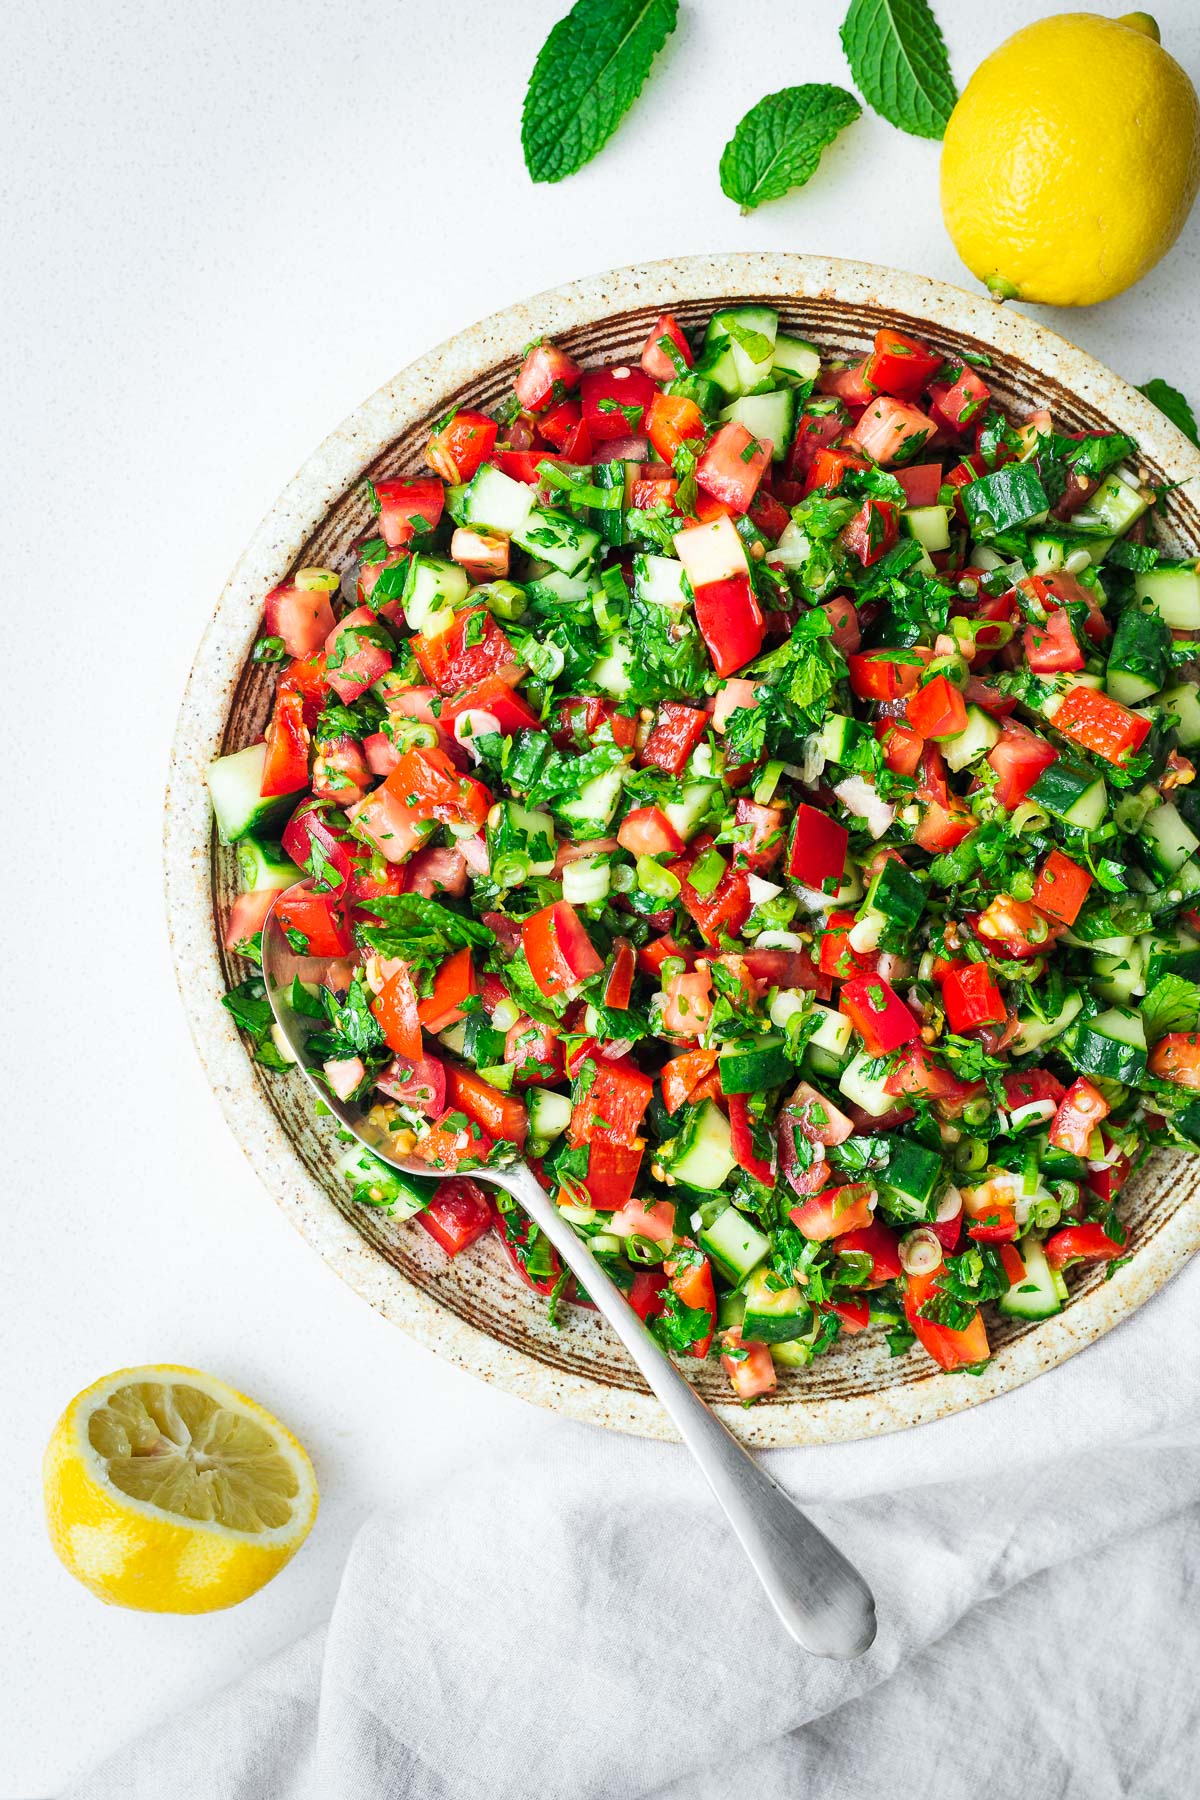 A fresh Arabic chopped salad on a serving plate with a silver spoon, viewed from above.